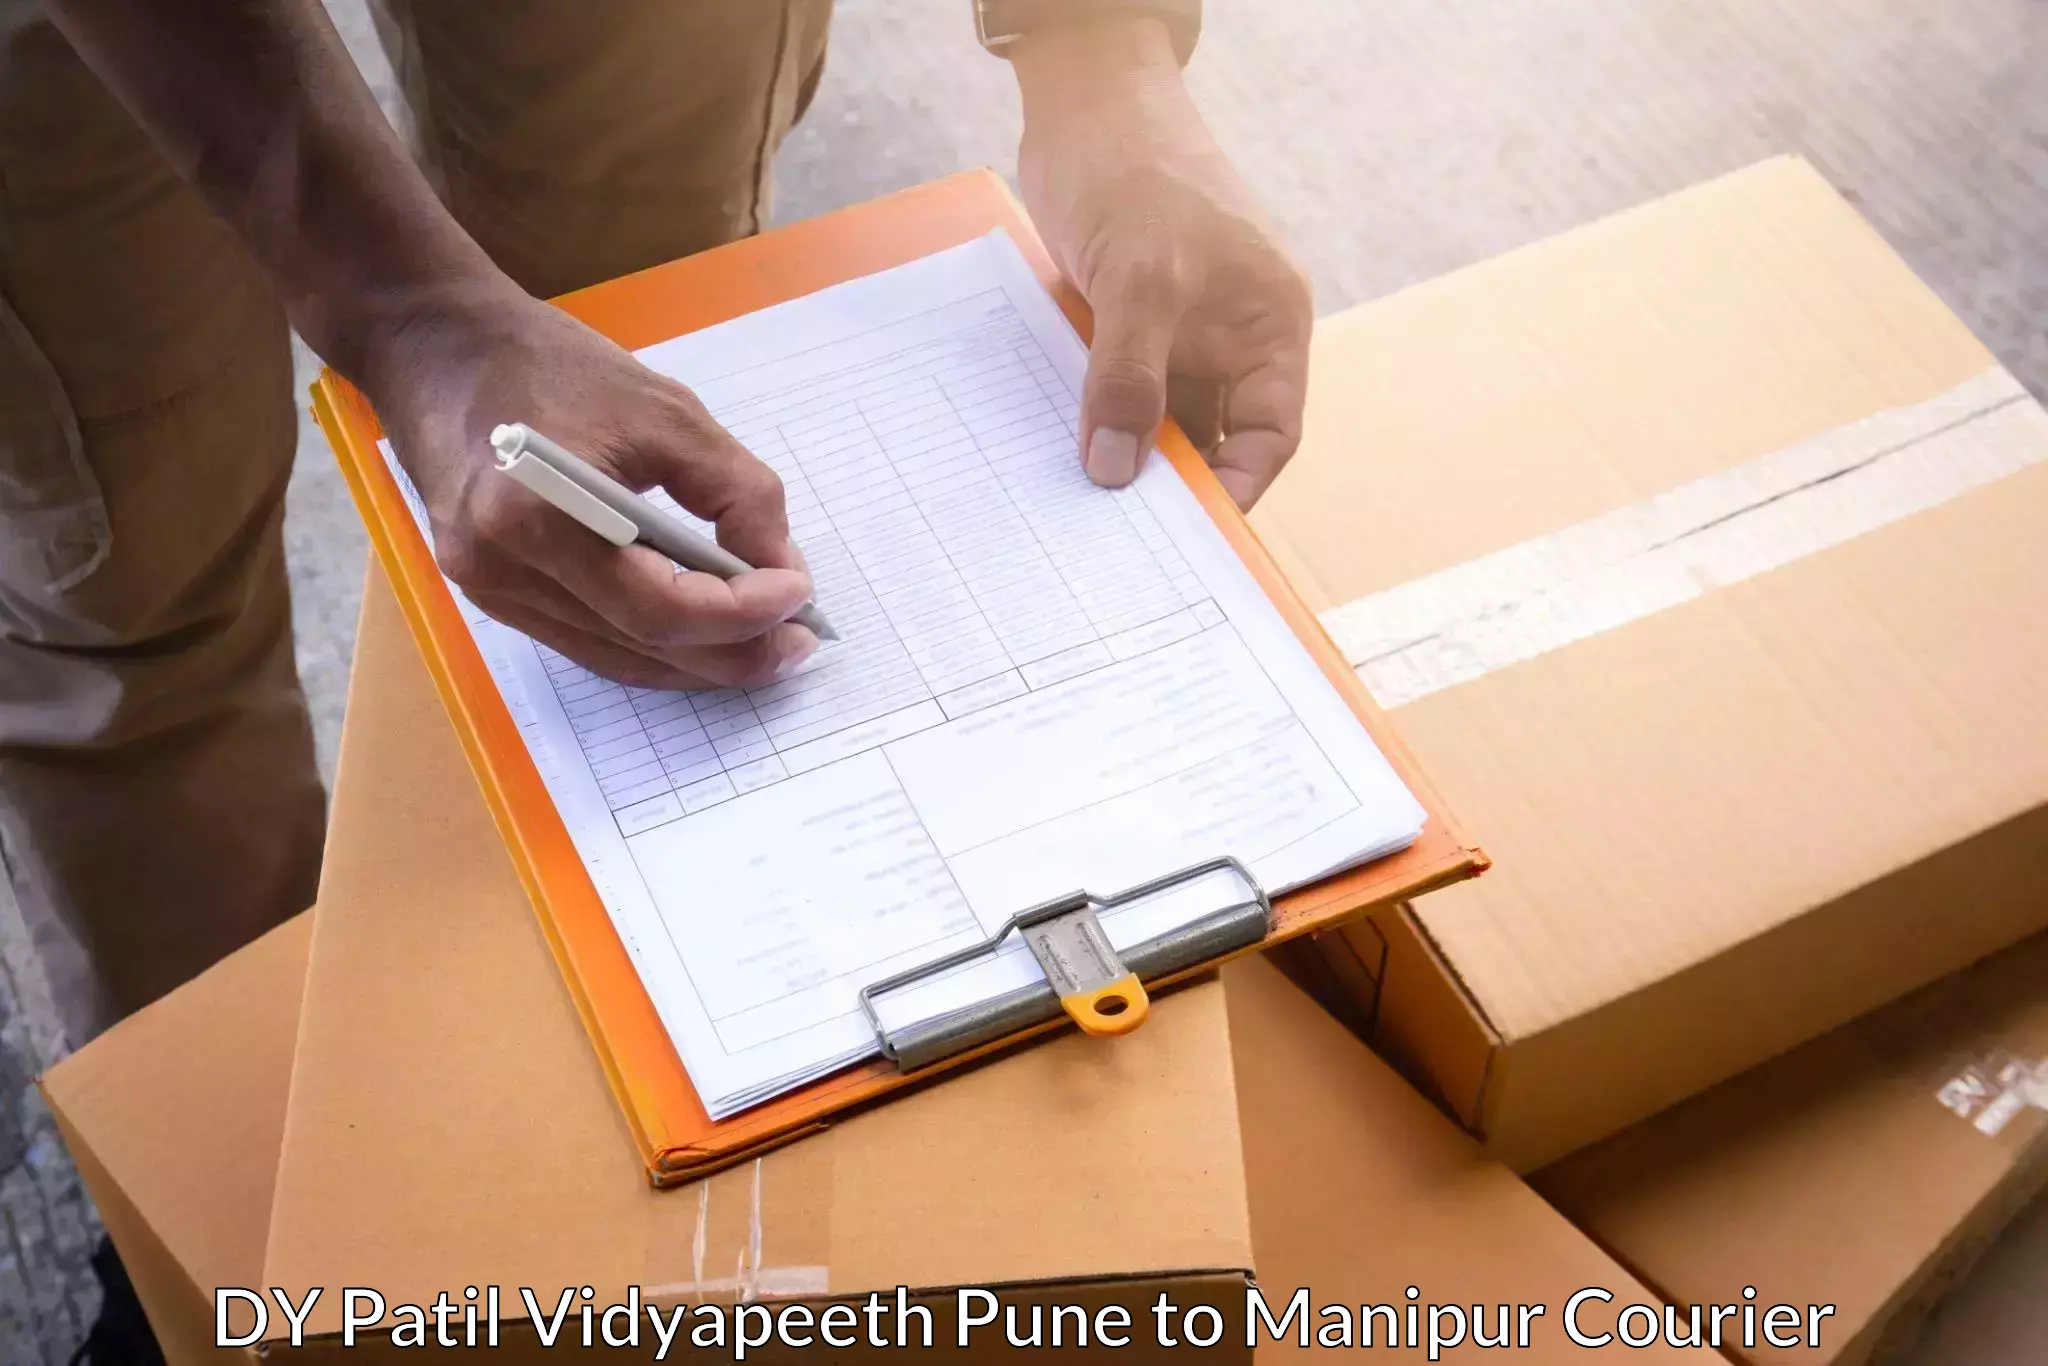 Comprehensive shipping services DY Patil Vidyapeeth Pune to Imphal